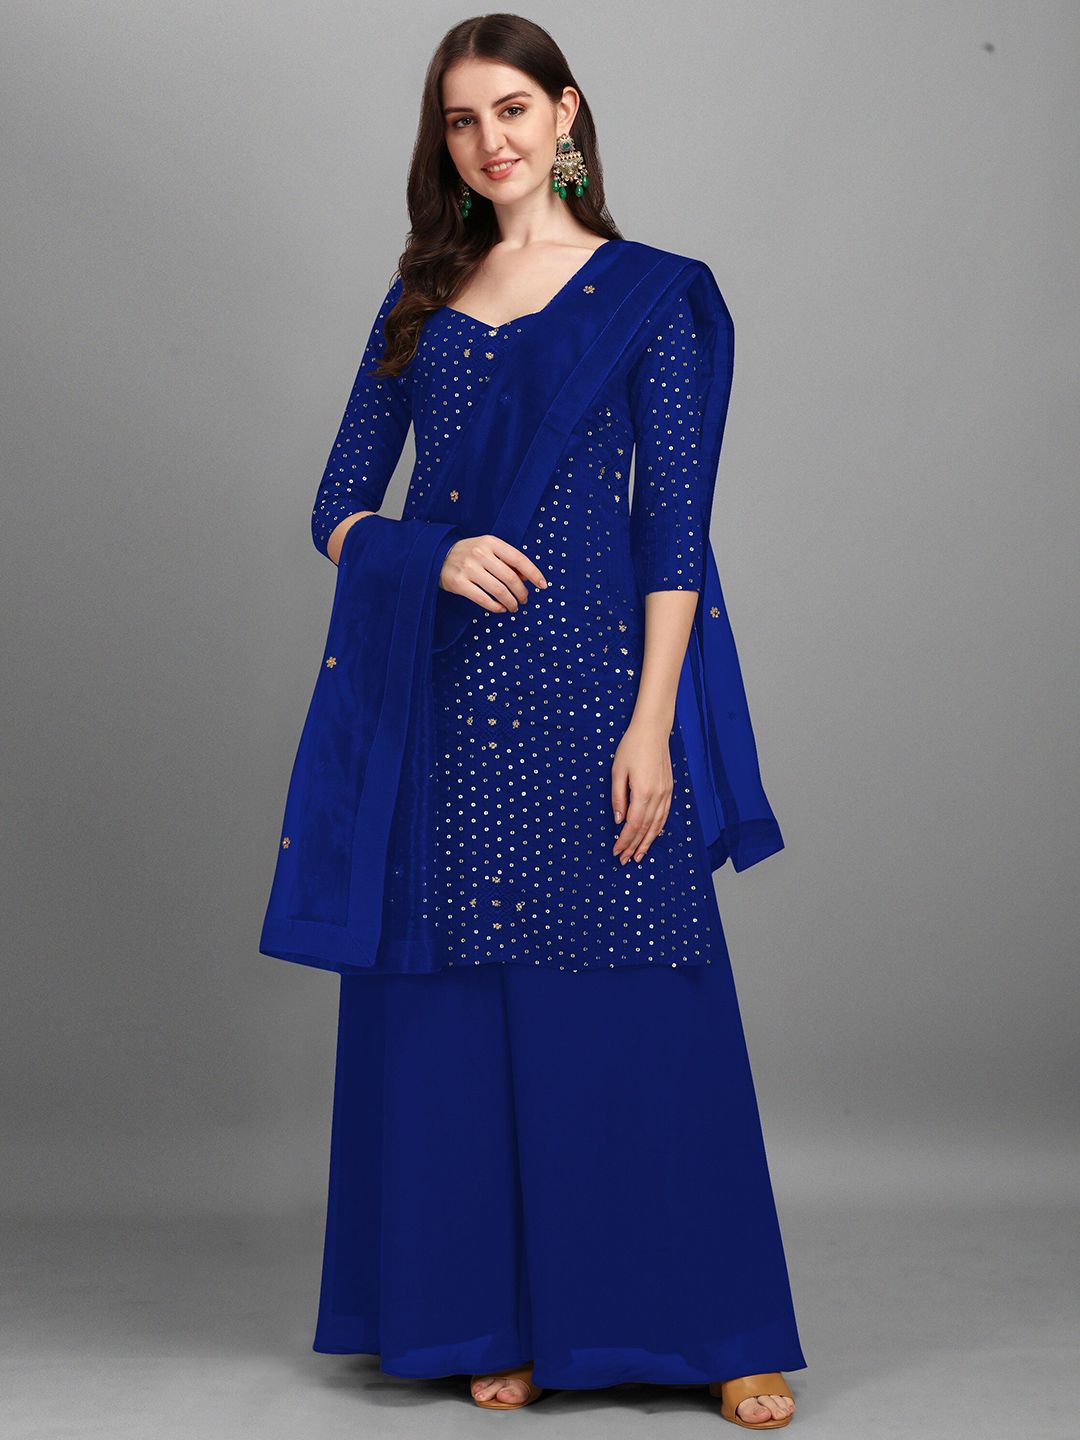 Fashion Basket Blue & Gold-Toned Embroidered Semi-Stitched Dress Material Price in India